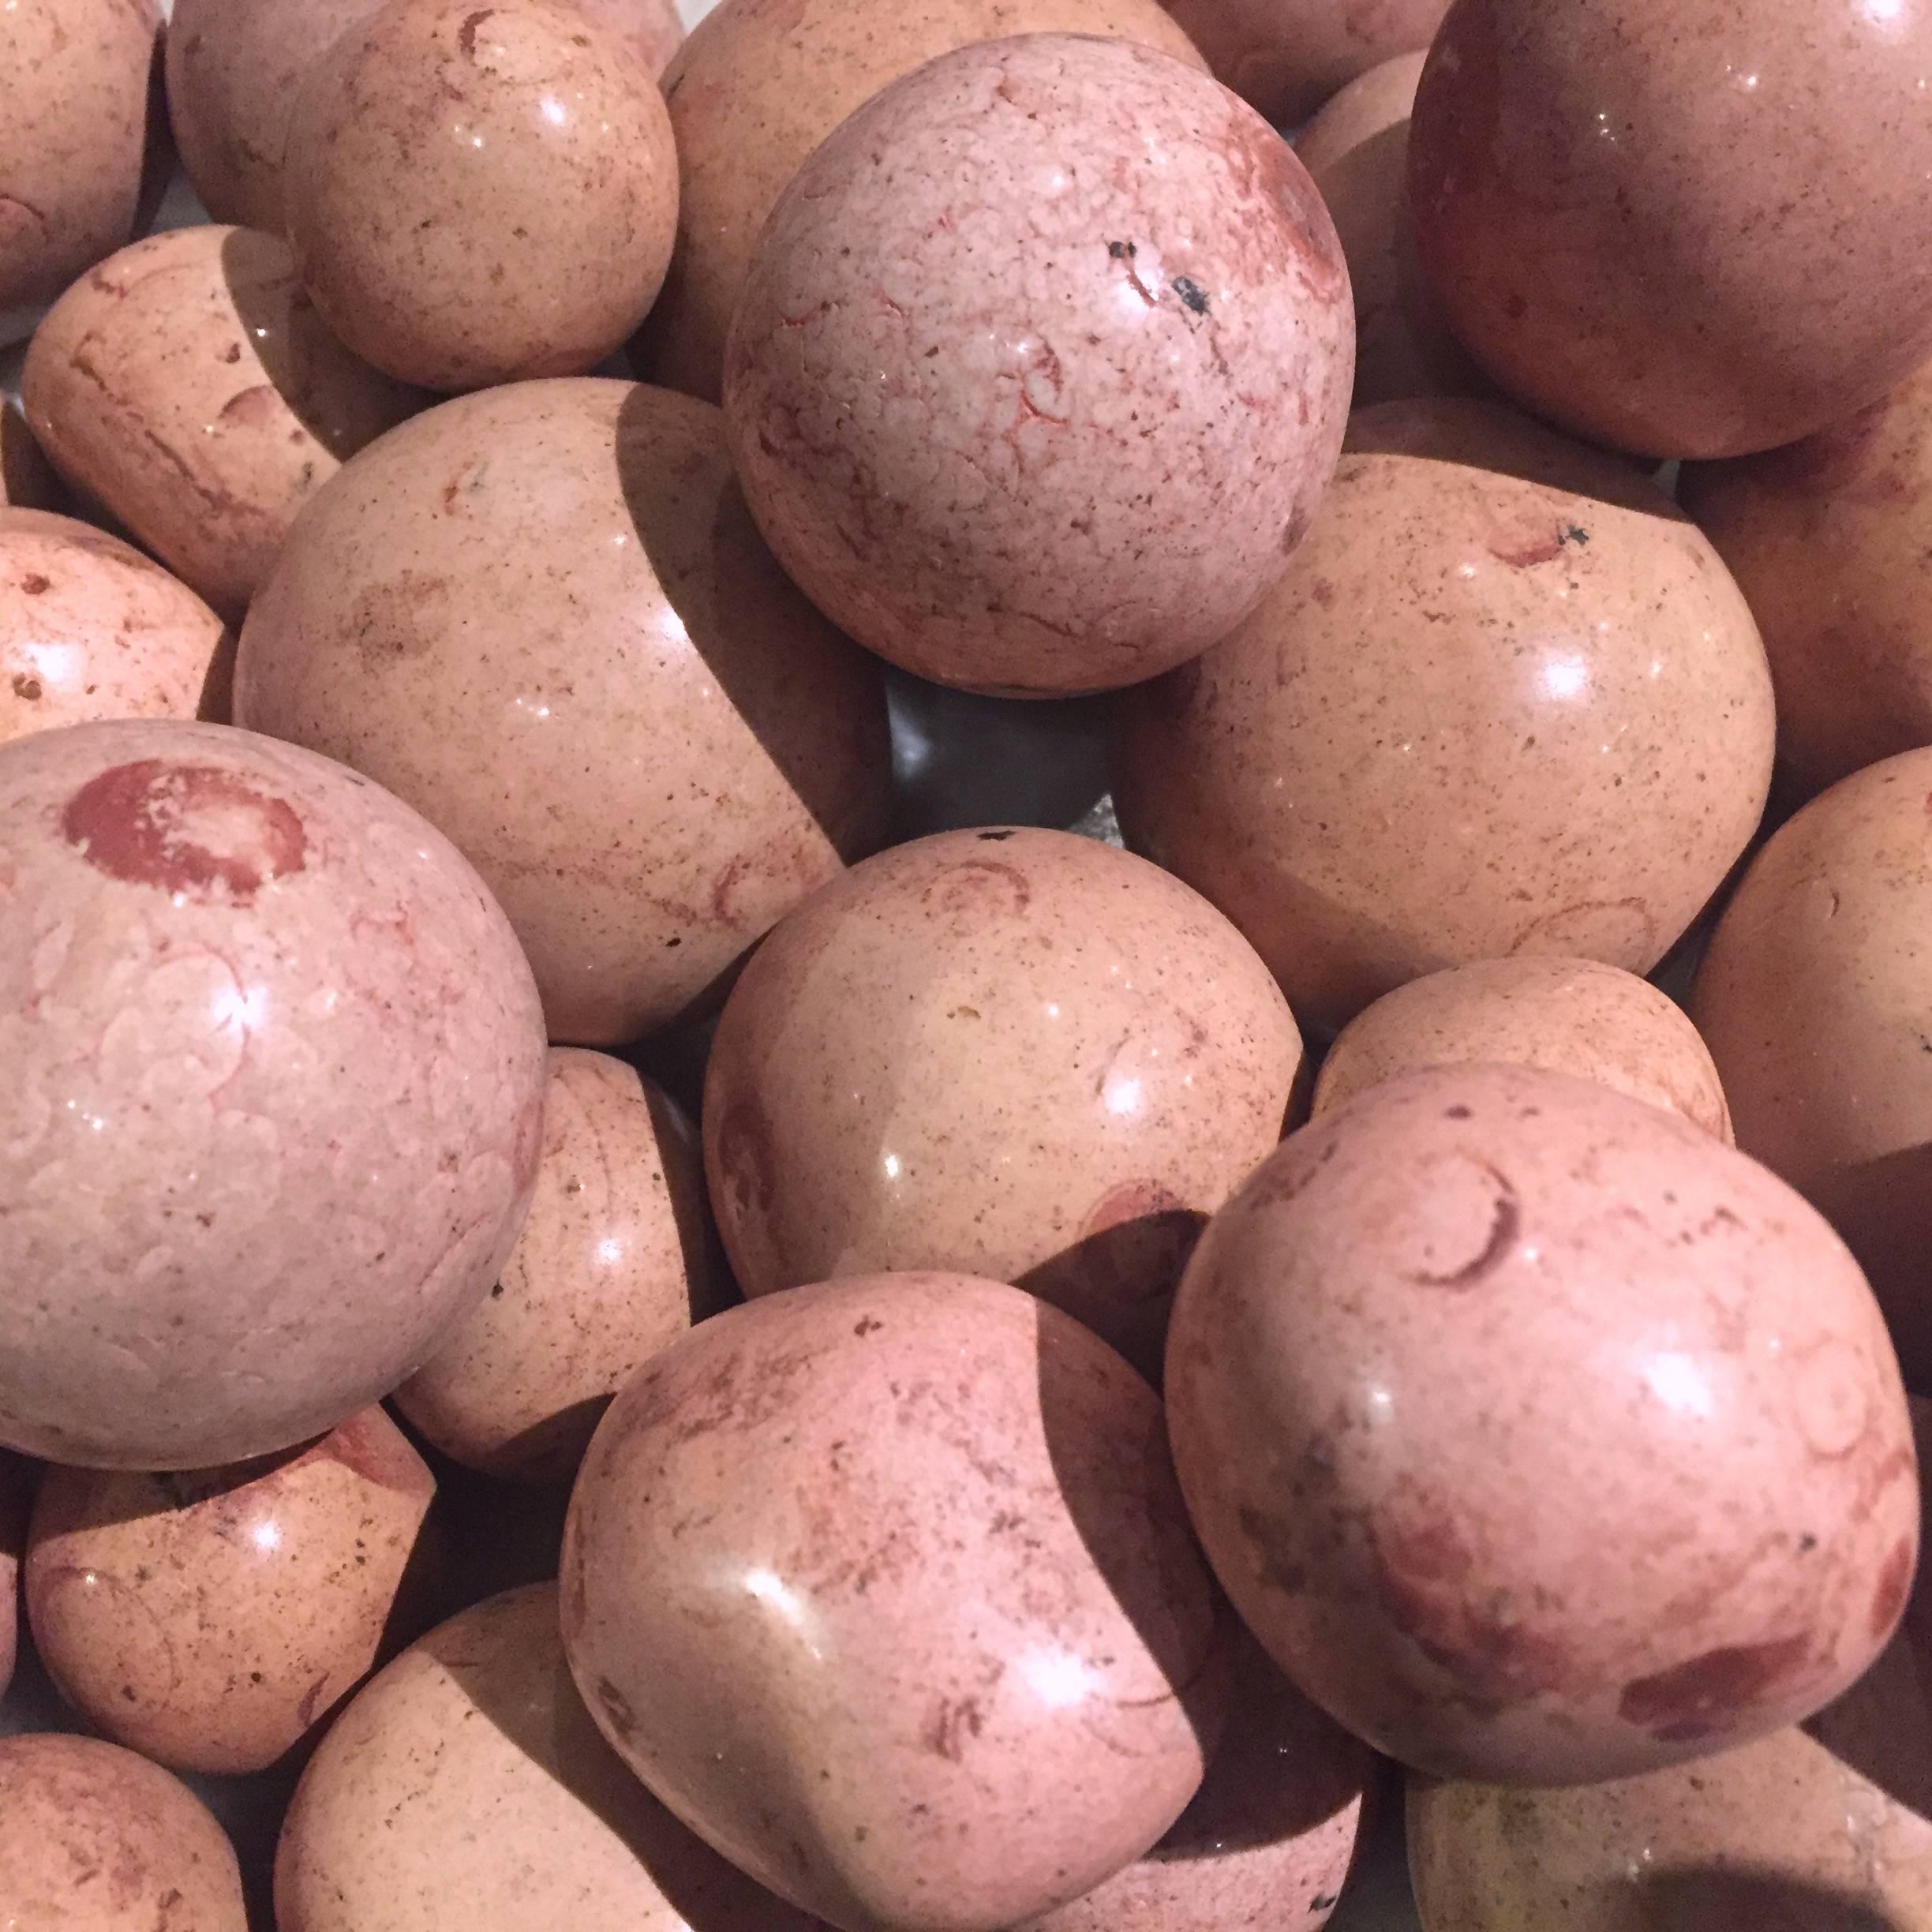 Contemporary Brazilian collection of 25 in total rose colored stone balls.
Four different sizes
Measures: Extra large 2.5